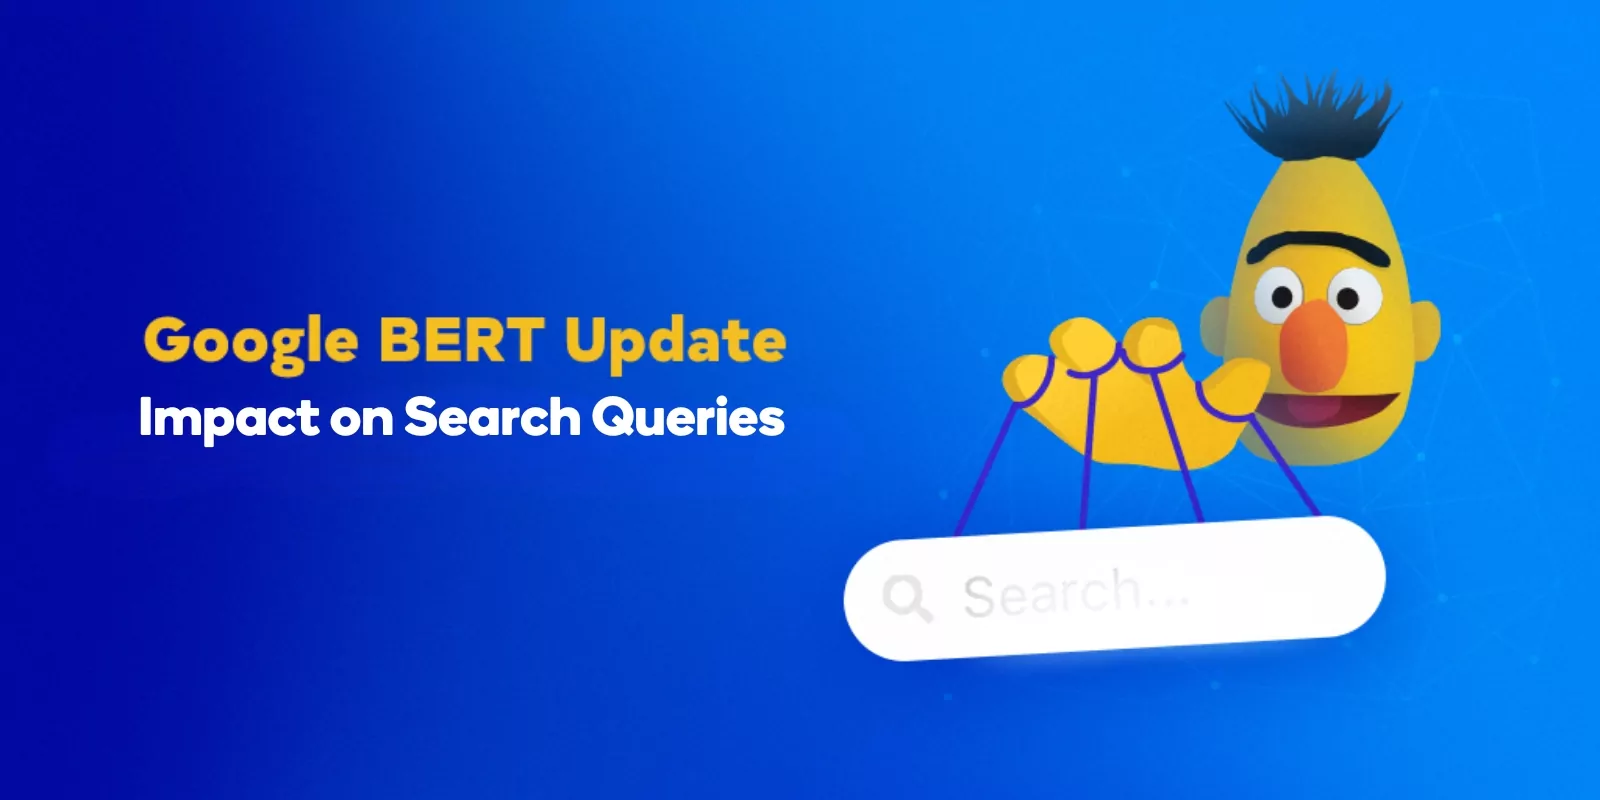 BERT's Impact on Search Queries